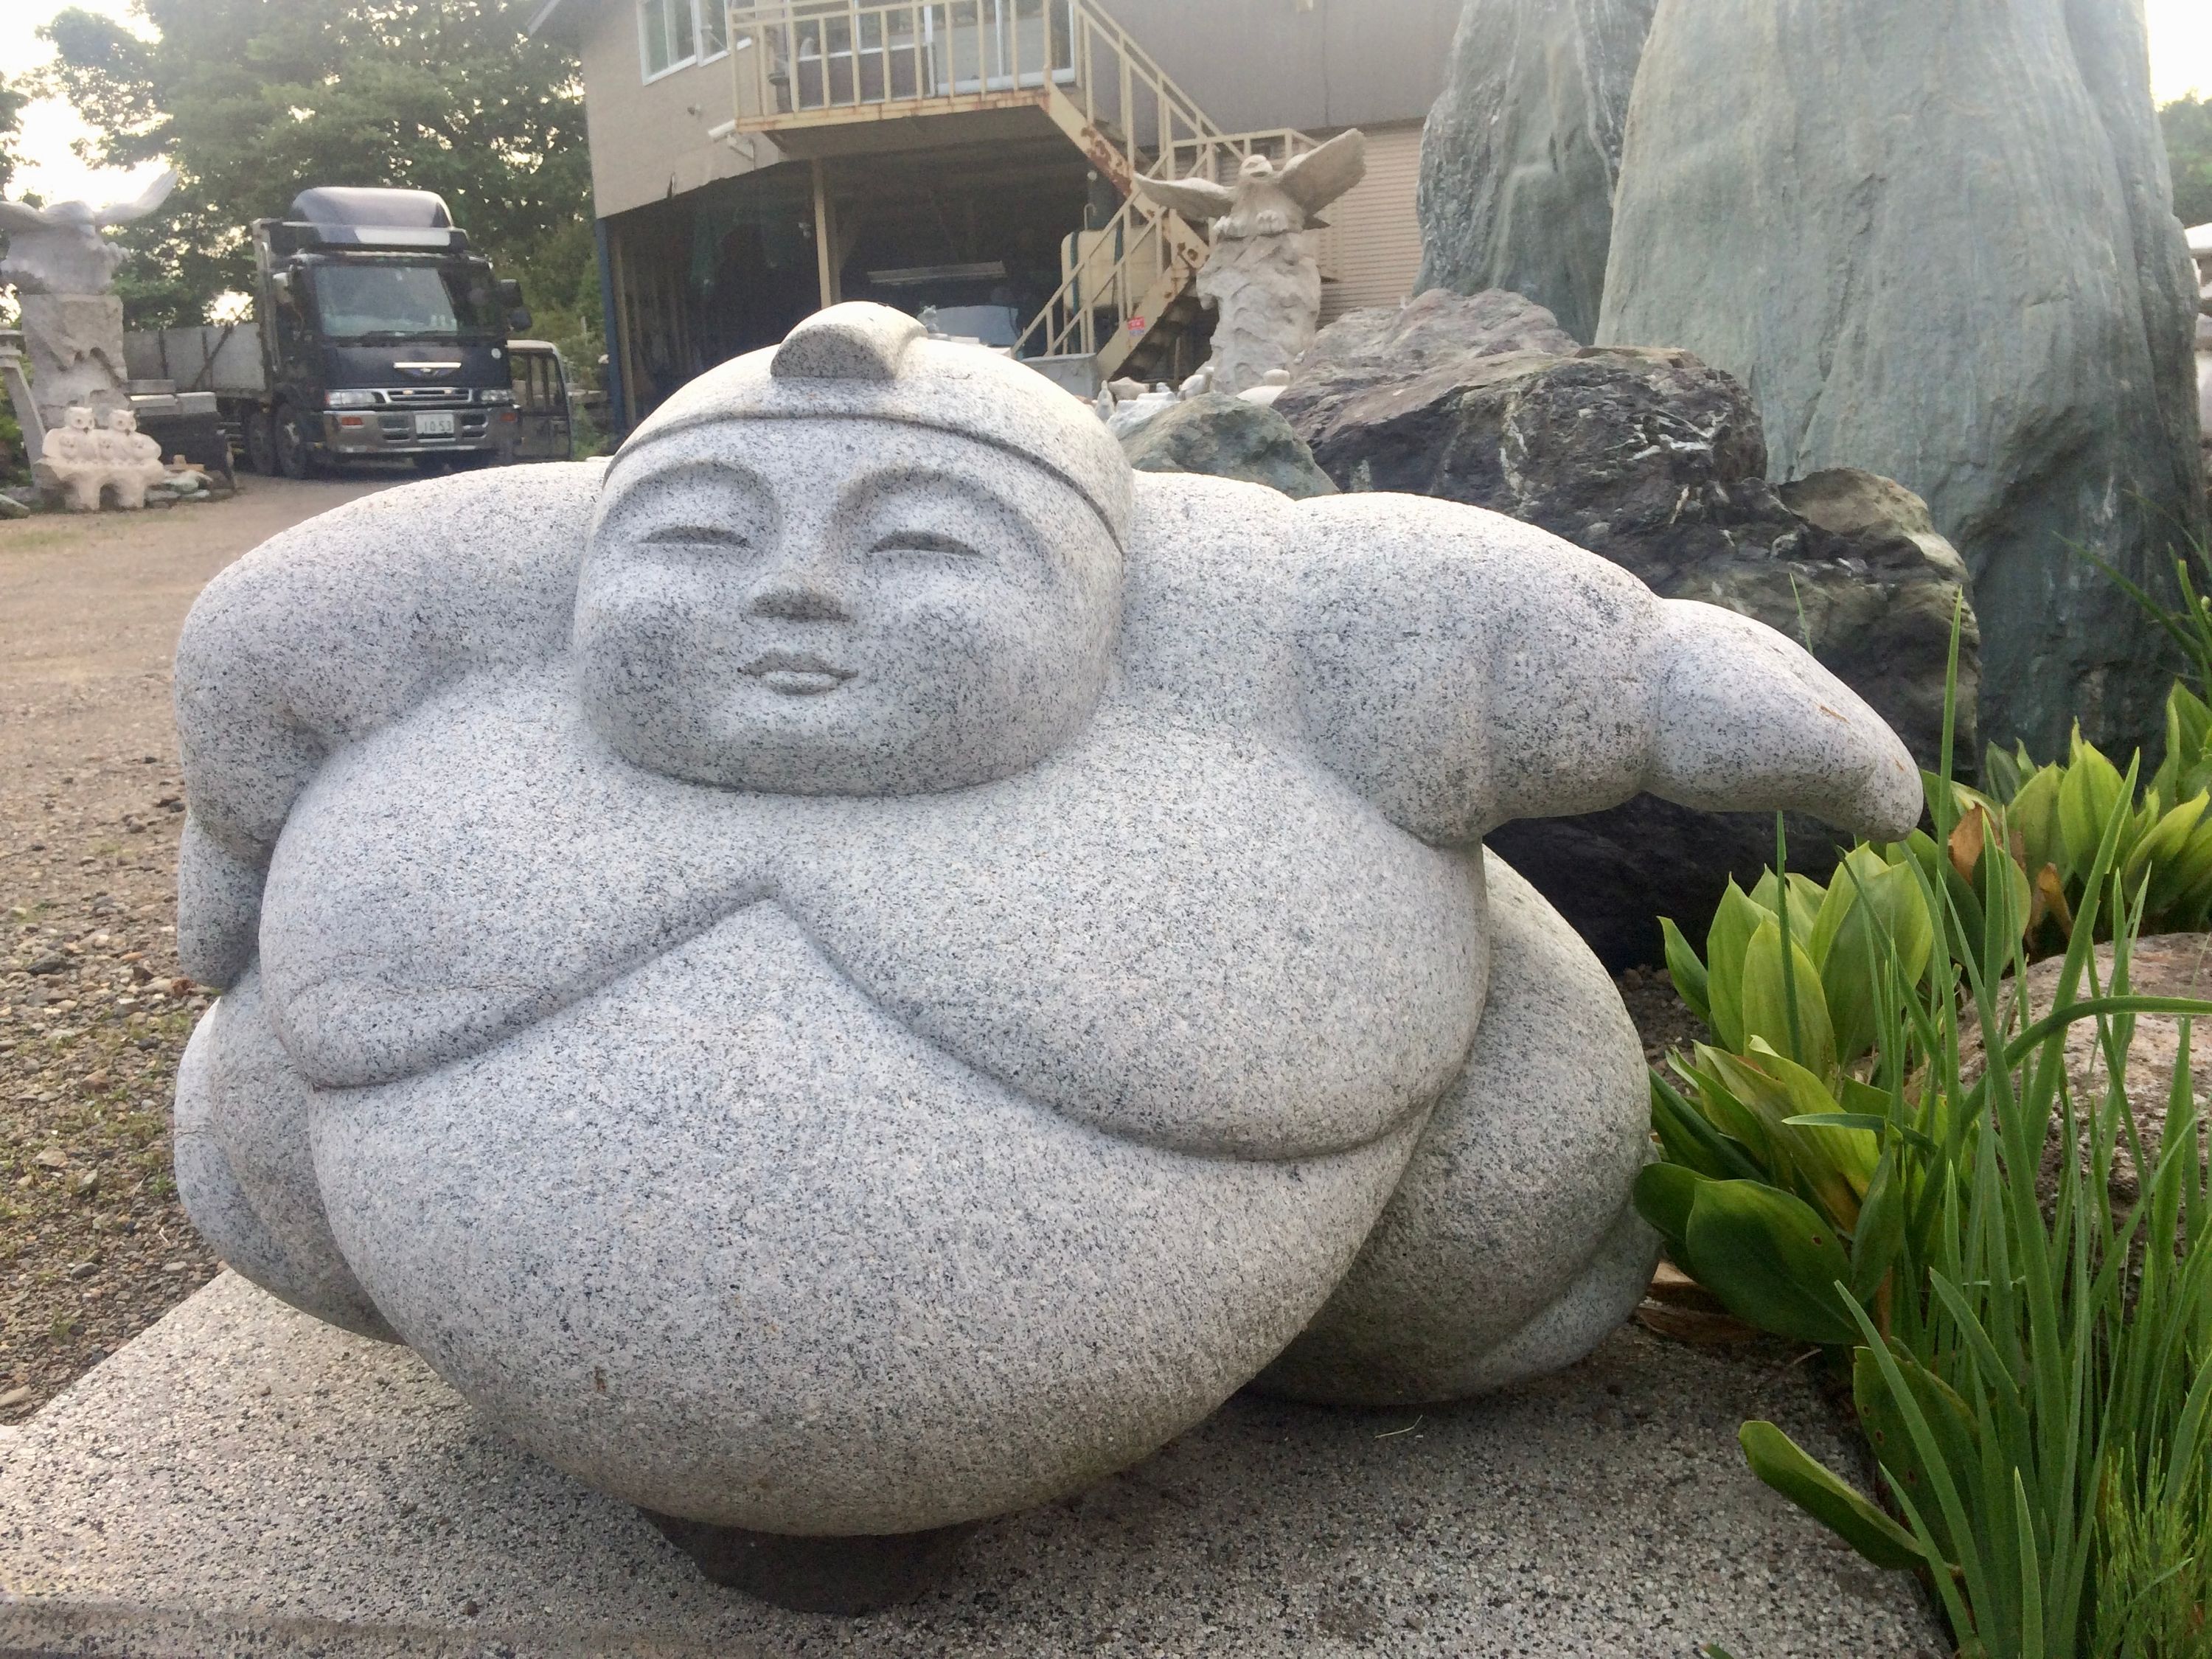 A simple statue of a very large sumo wrestler in a front yard.